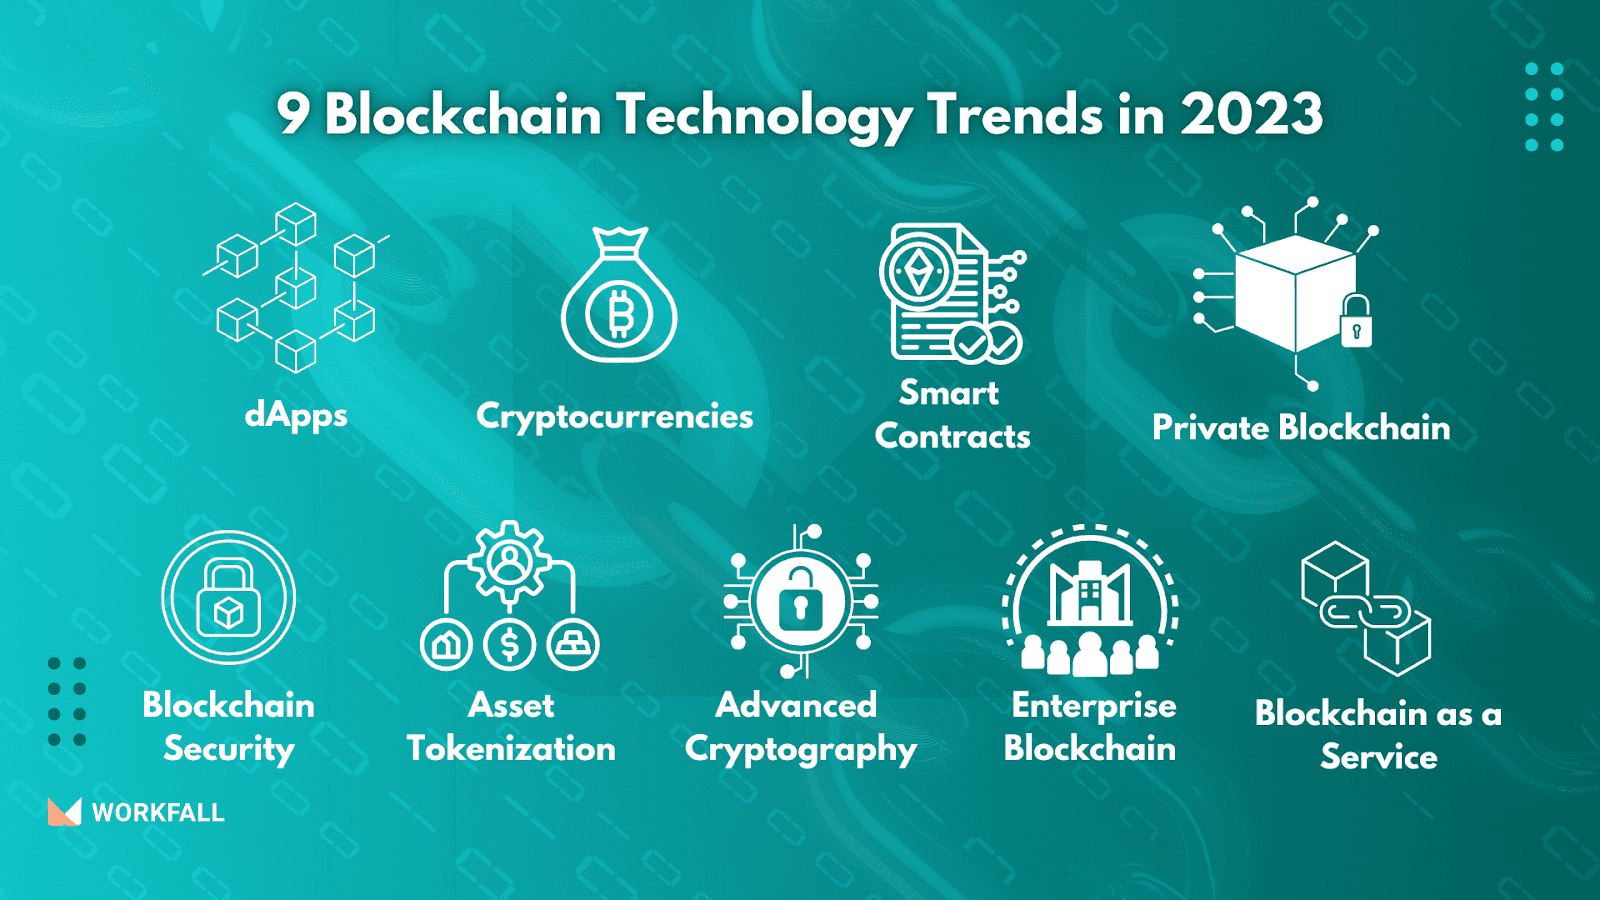 9 Blockchain Technology Trends to Look Out For in 2023